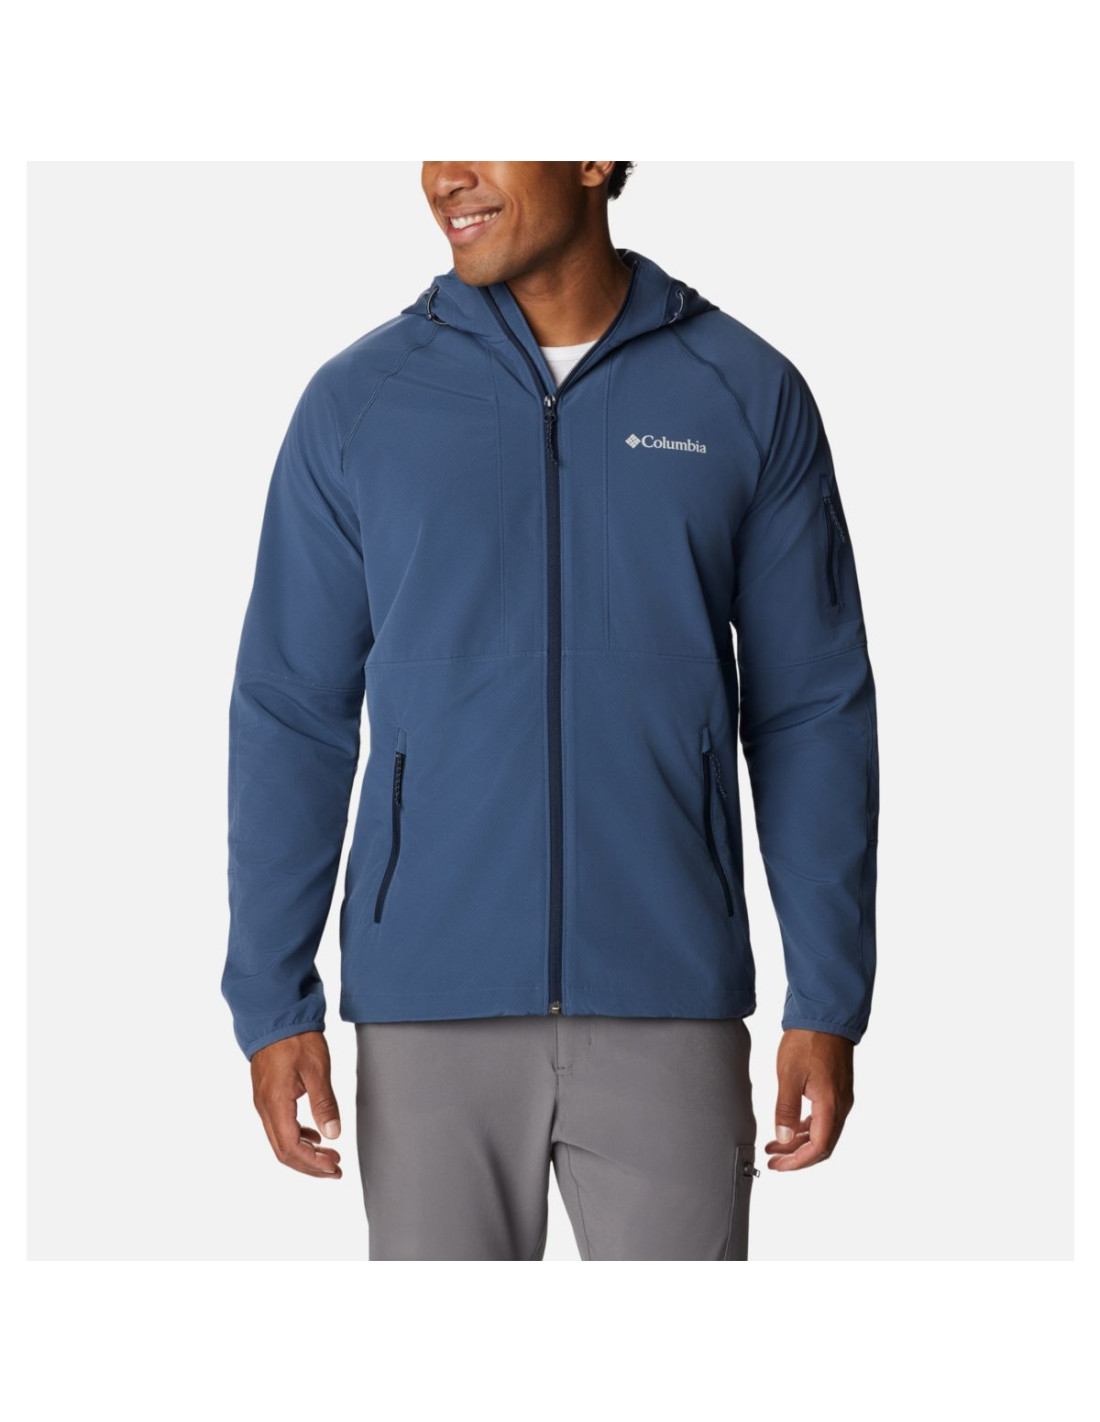 TALL HEIGHTS™ HOODED SOFTSHELL